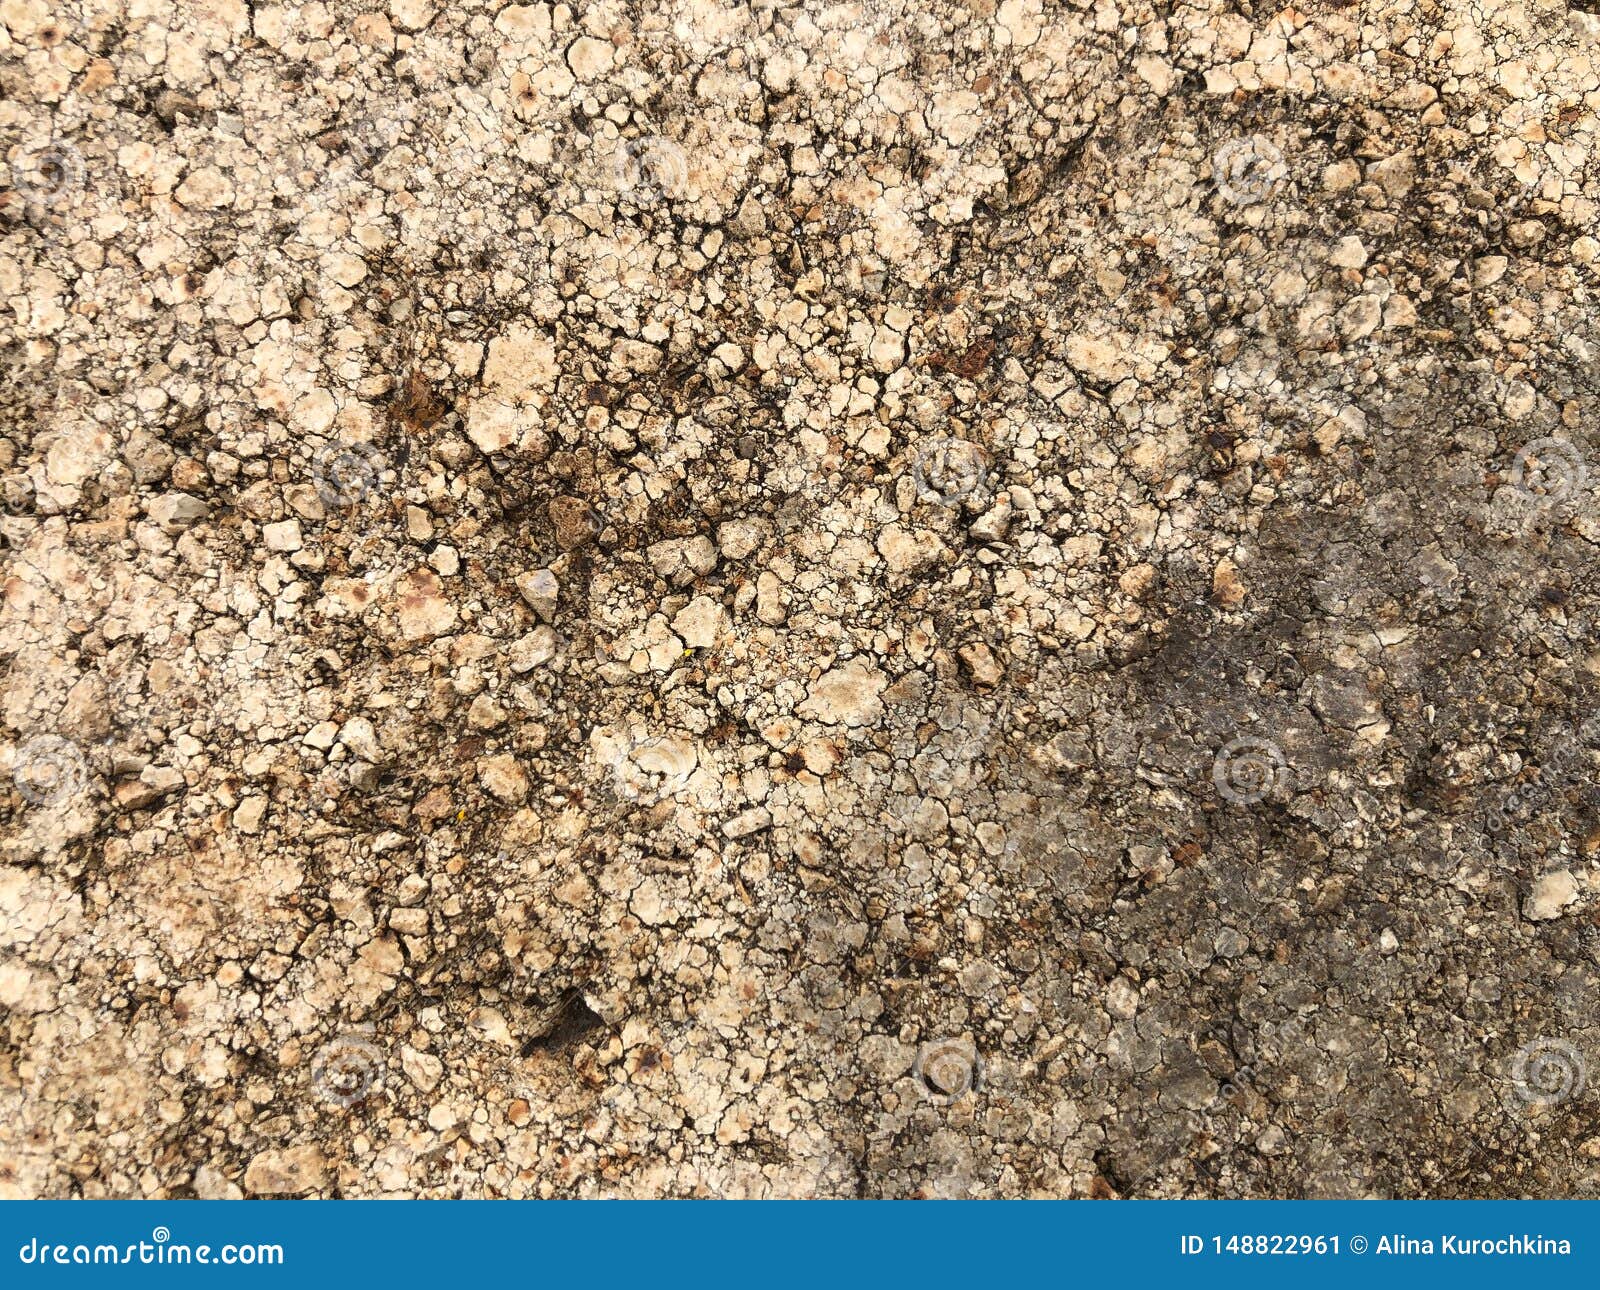 Dirty Speckled Stone Texture for Presentation Background Stock Image ...